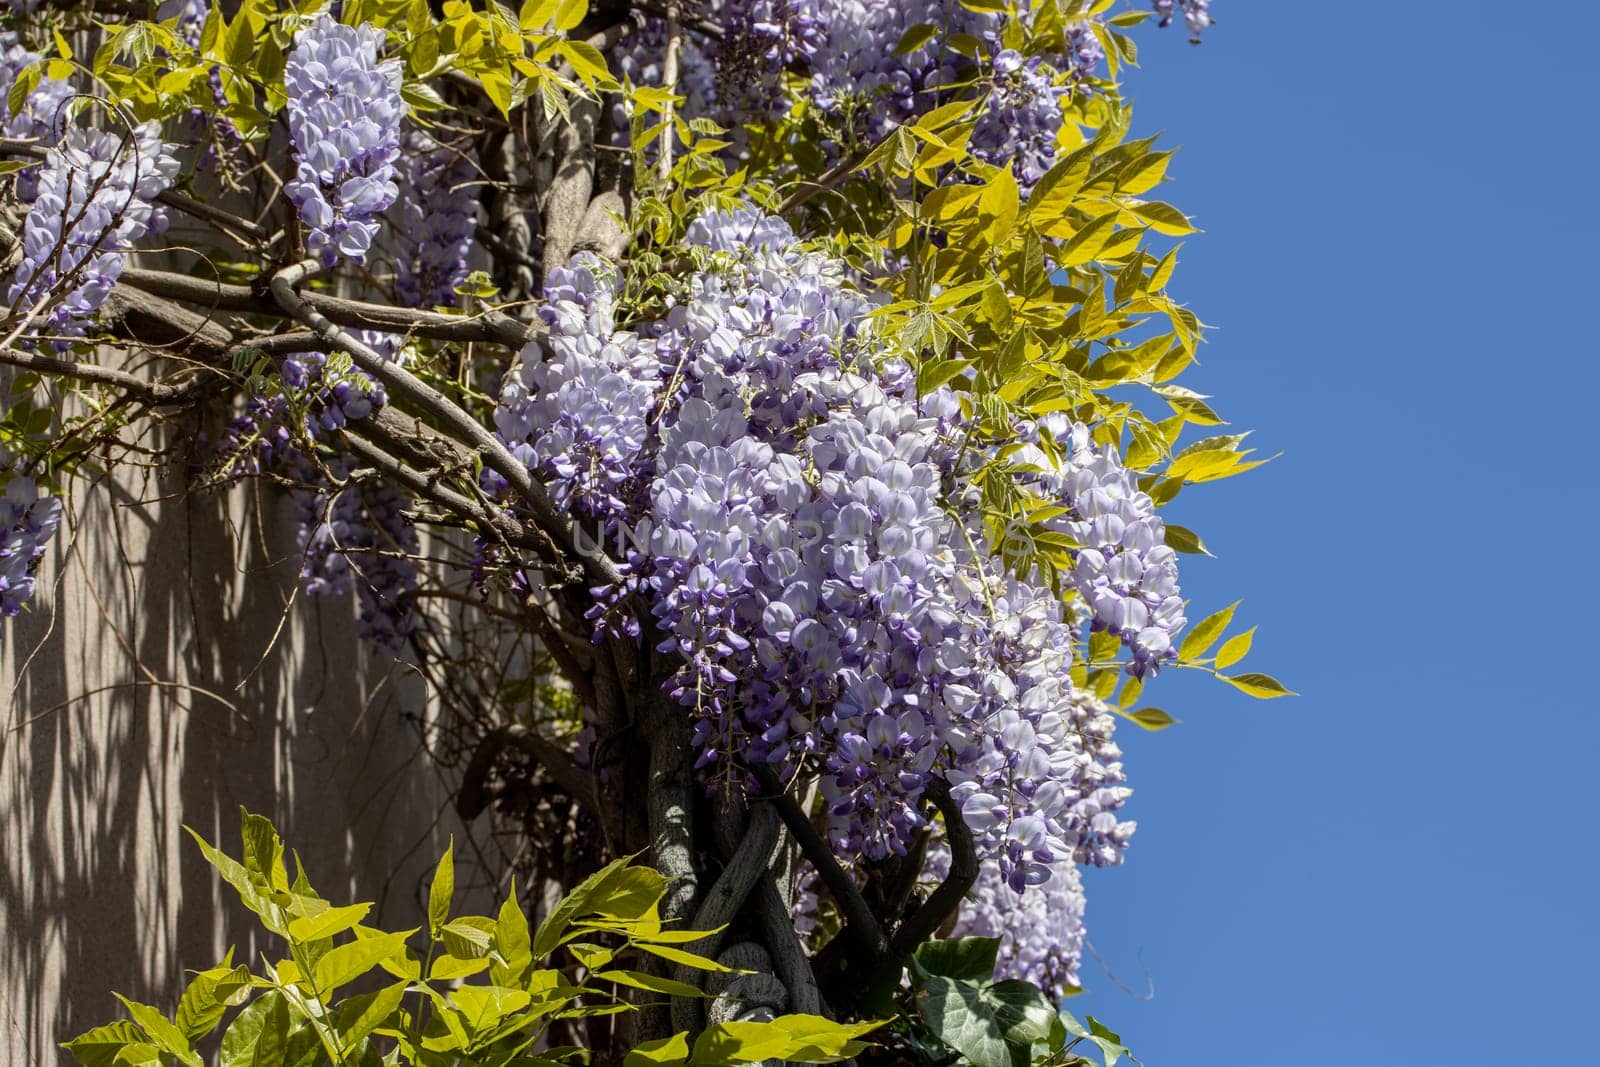 Flowering Wisteria plant on house wall concept photo. Countryside at spring season. Spring garden blossom background